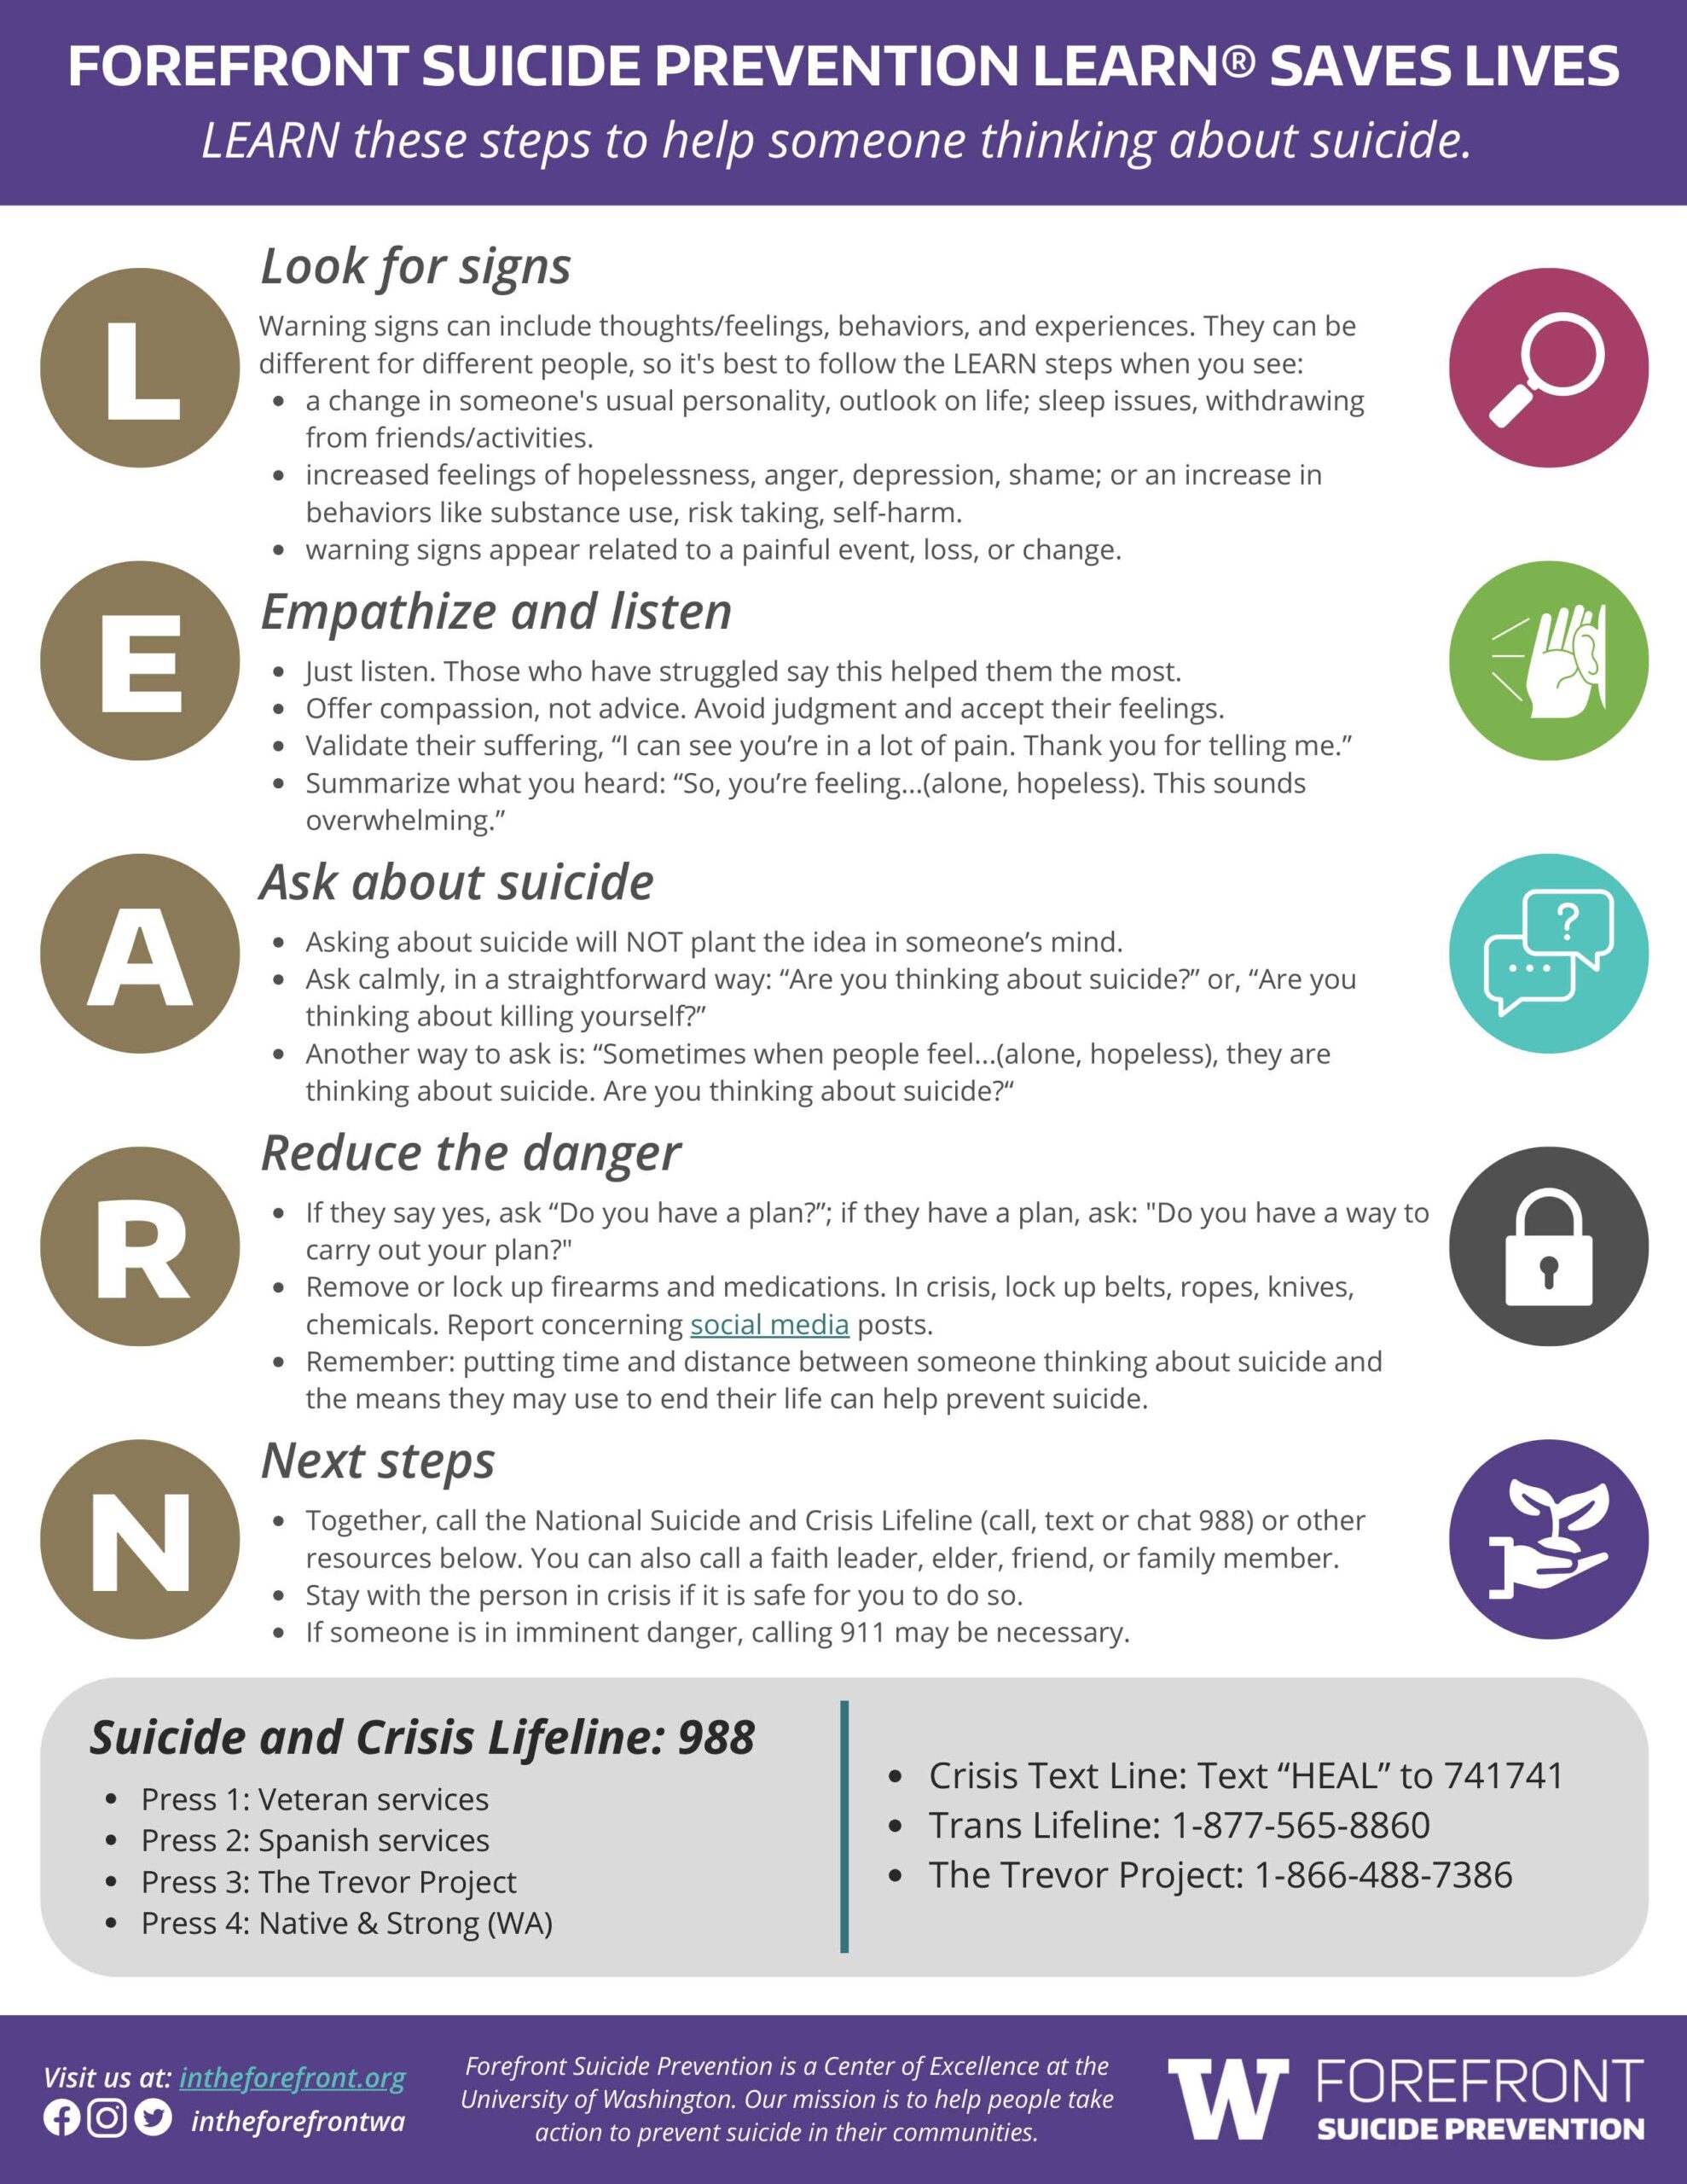 An infographic titled "Forefront suicide prevention LEARN saves lives. LEARN these steps to help someone thinking about suicide."